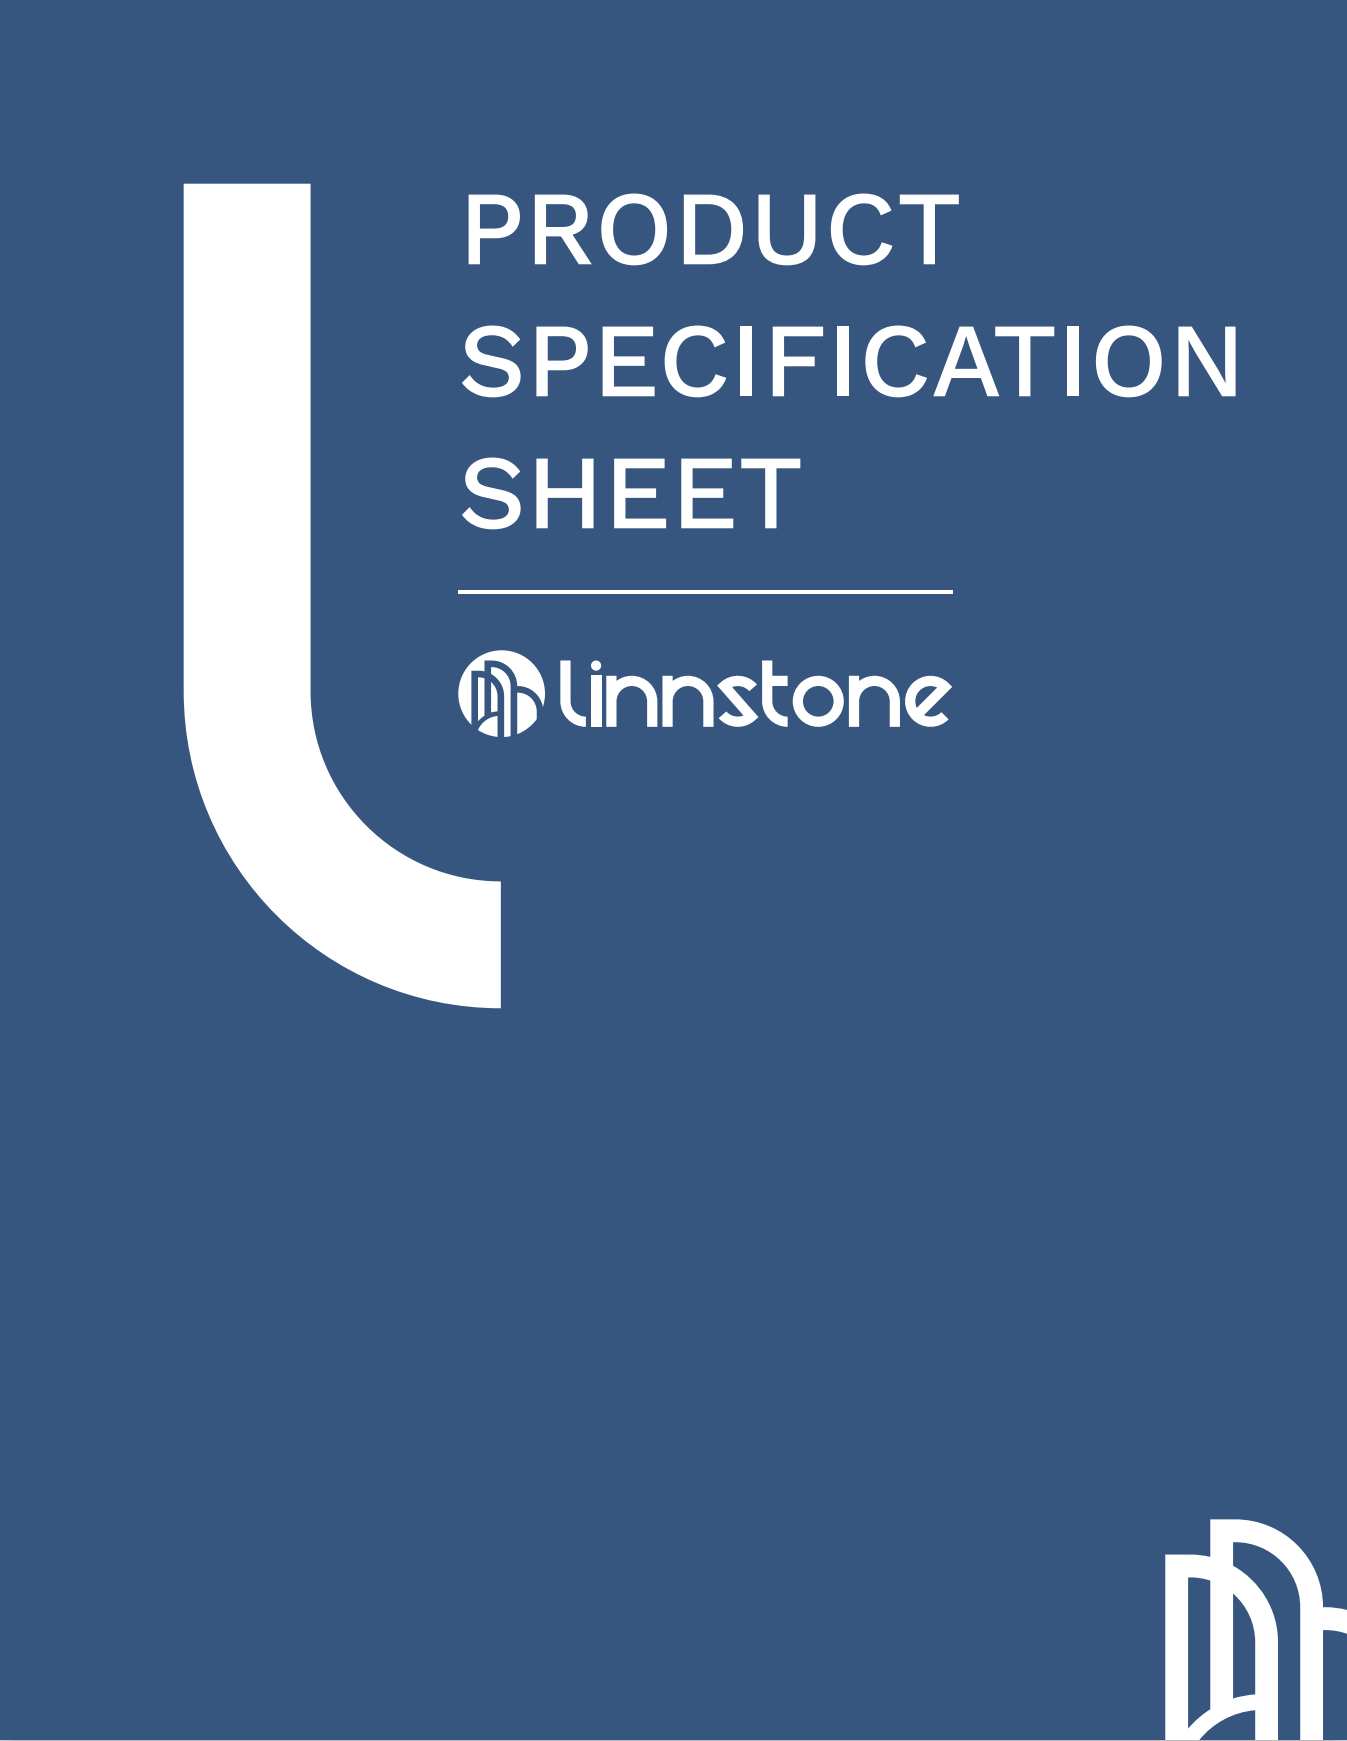 Product Specification Sheet Cover of Linnstone Quartz Surfaces